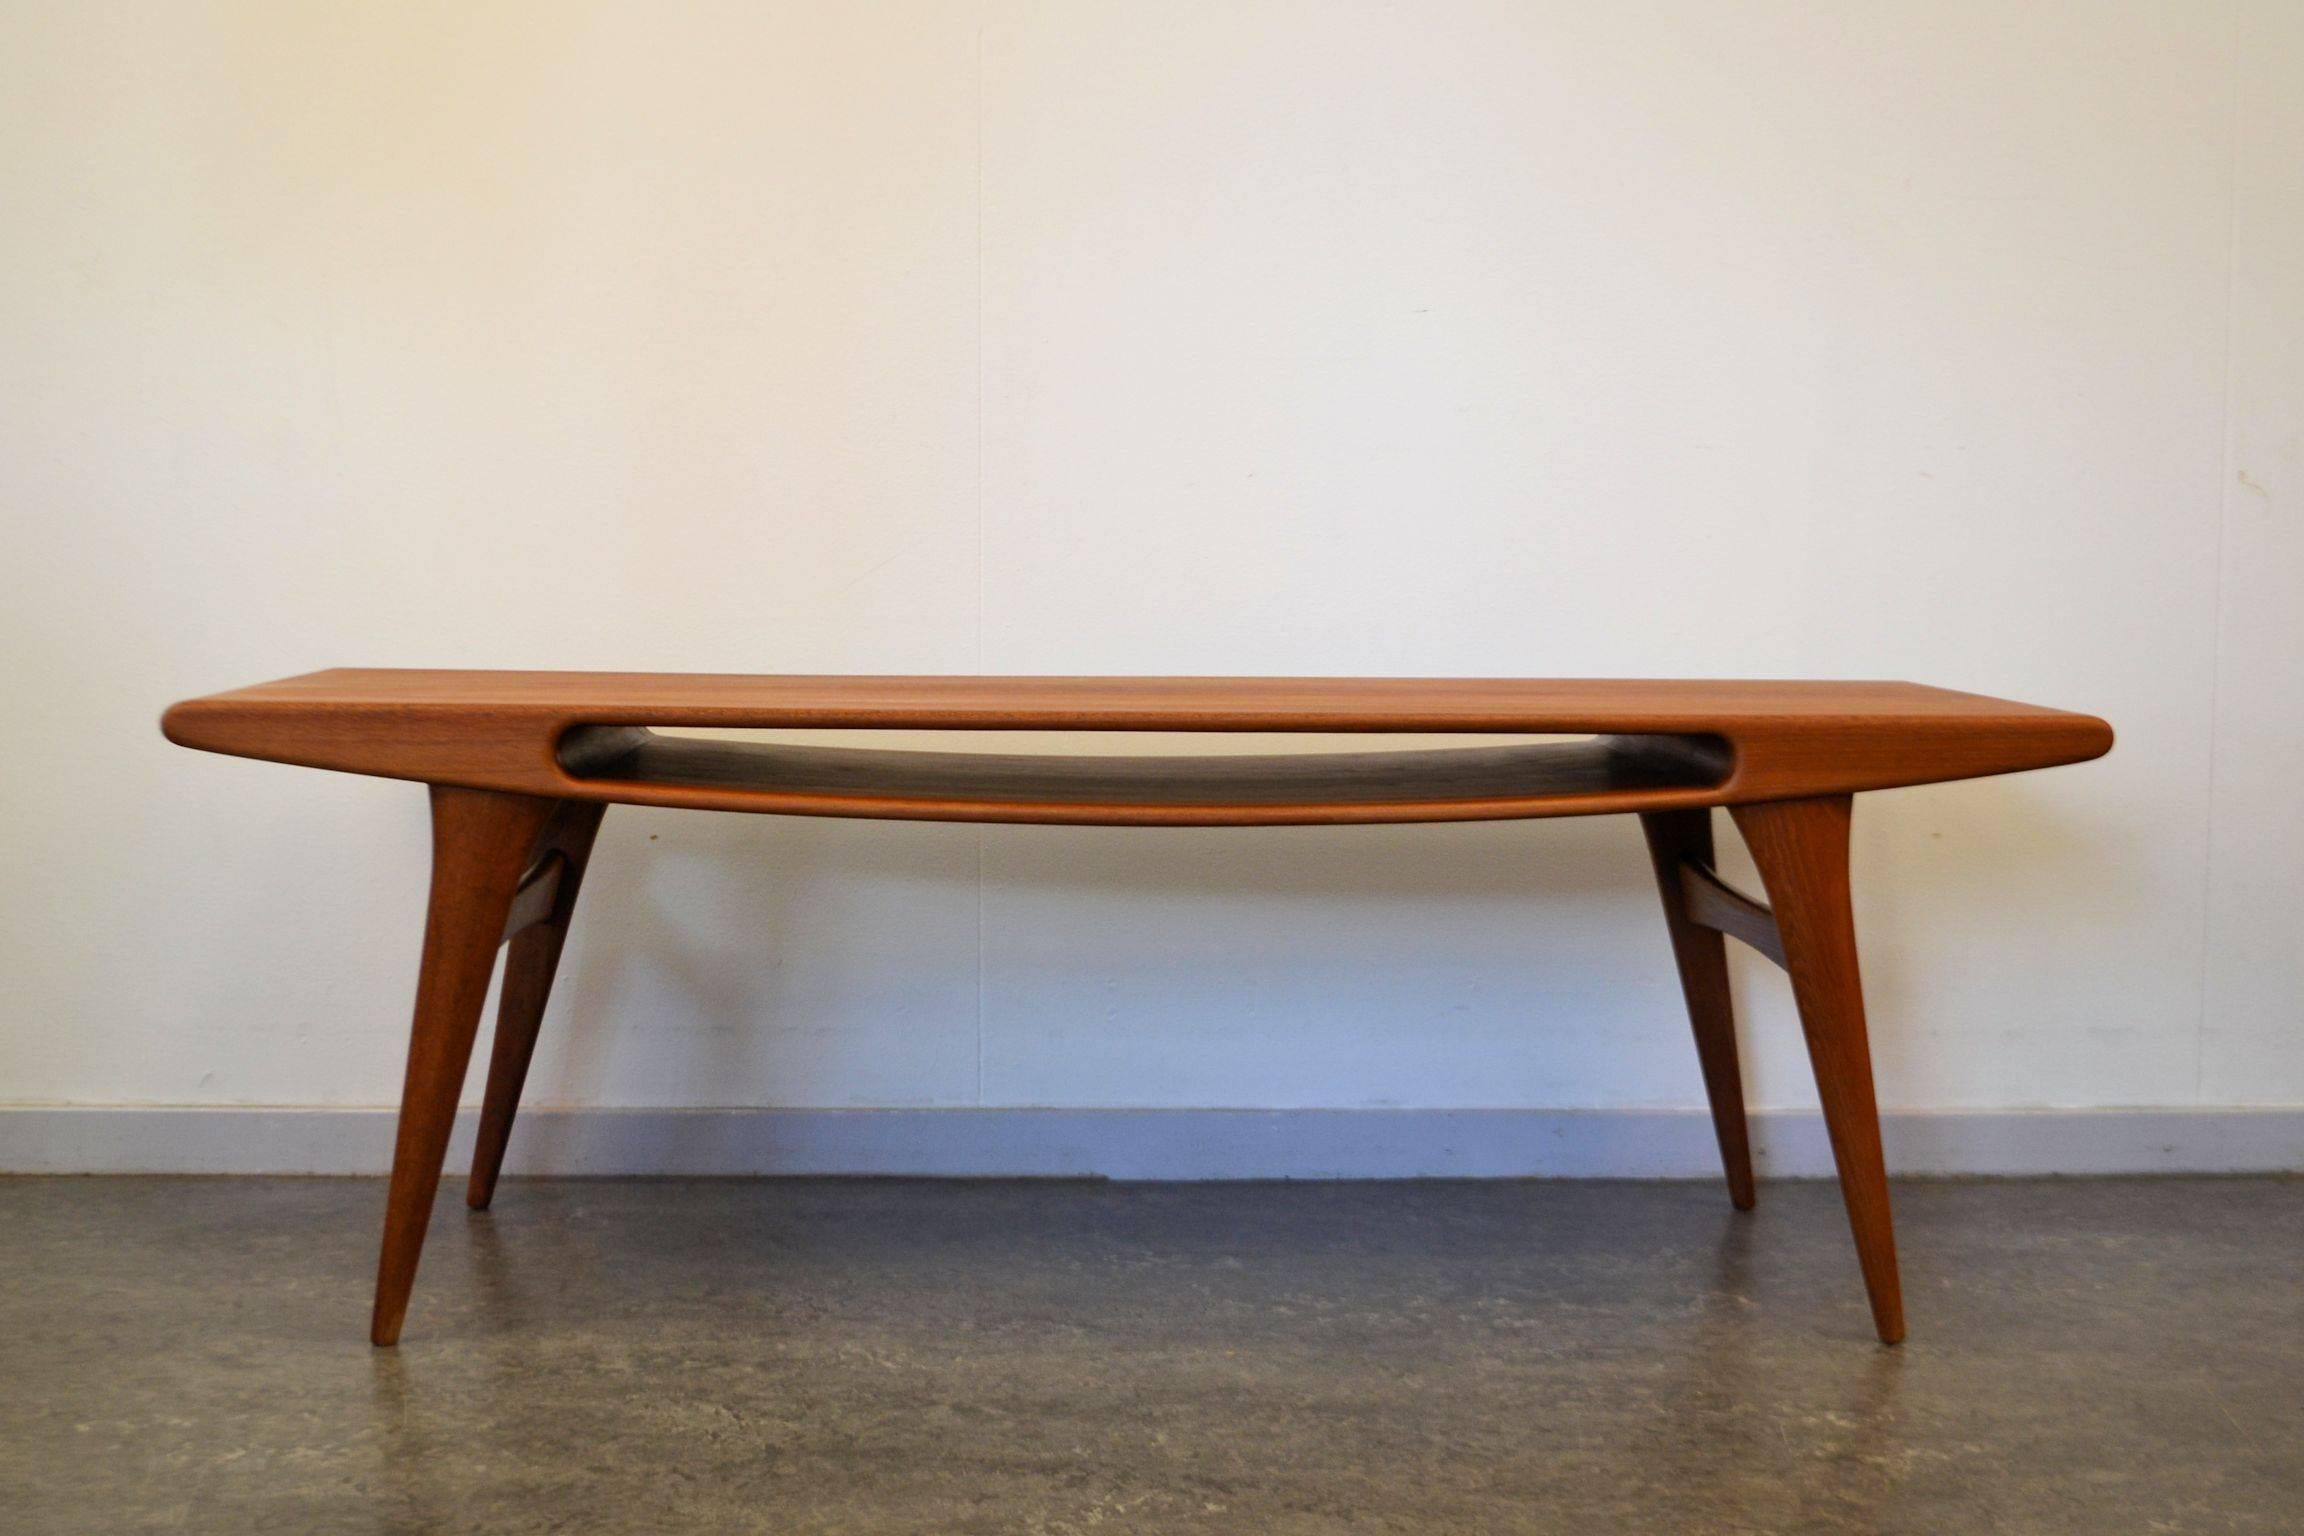 Absolutely stunning Danish modern “Smile” coffee table. This unique design adds an instant “wow